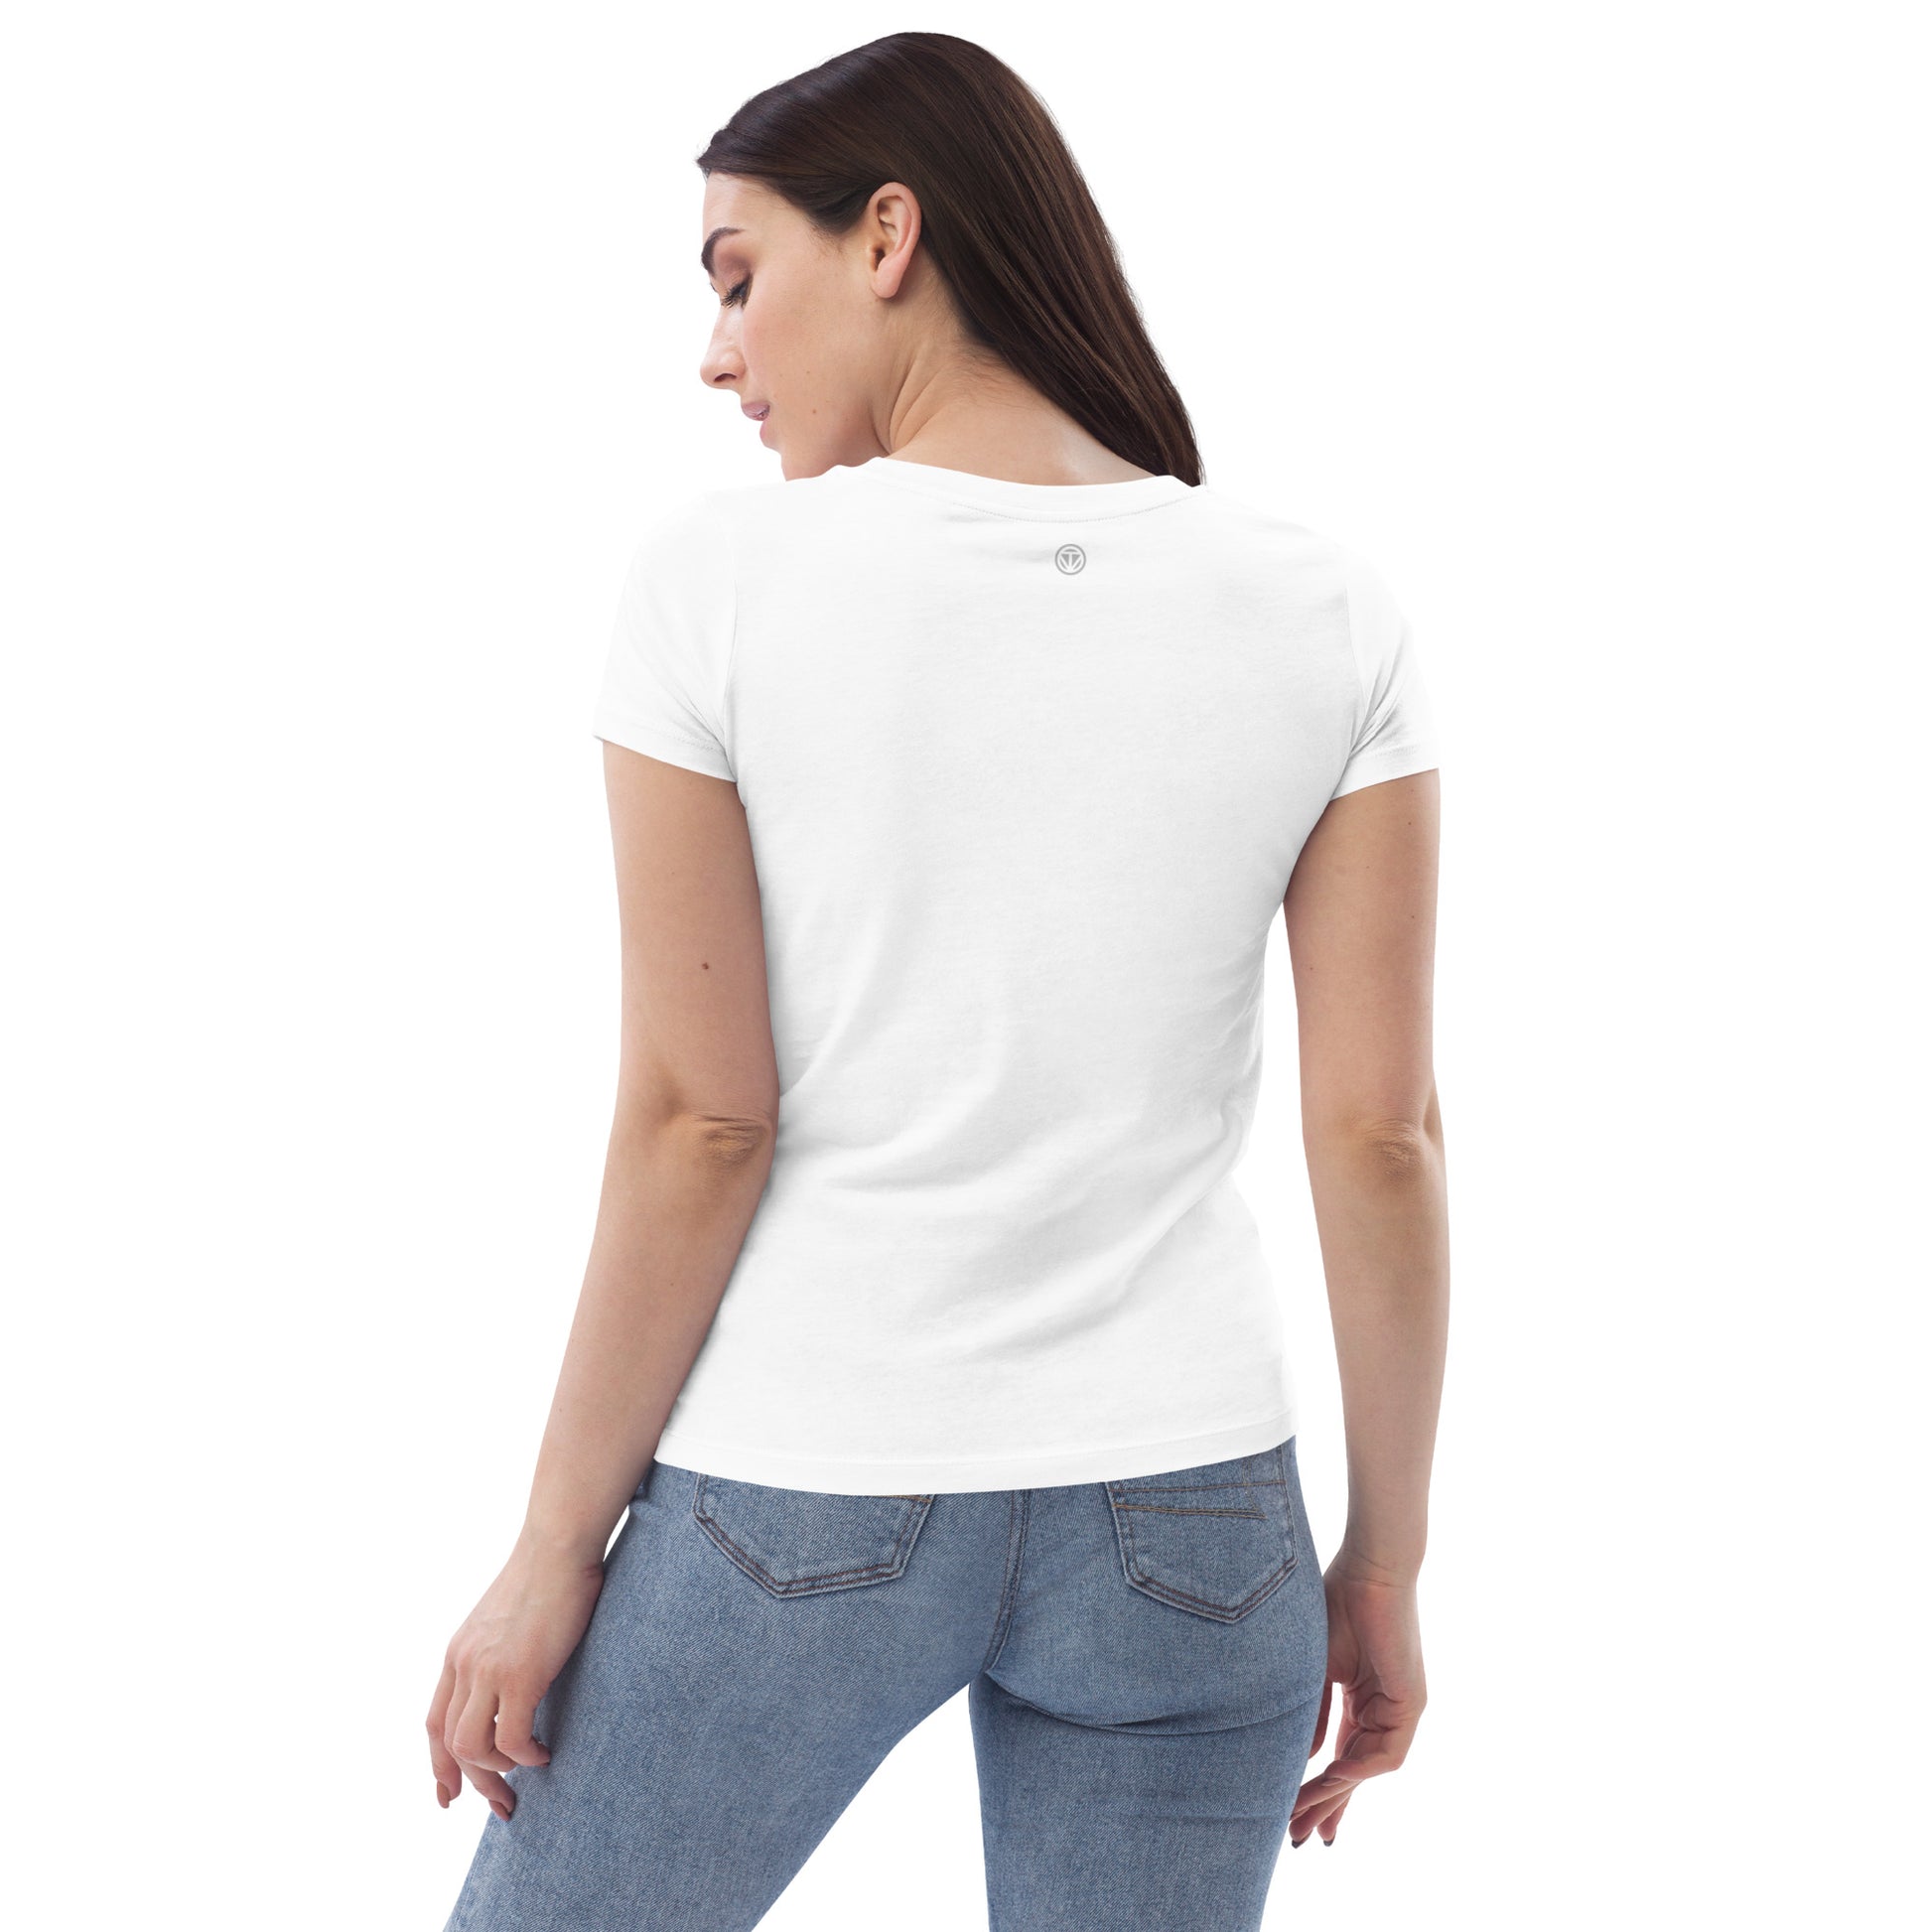 TIME OF VIBES - Women's fitted eco tee RIDE (White) - €32.00